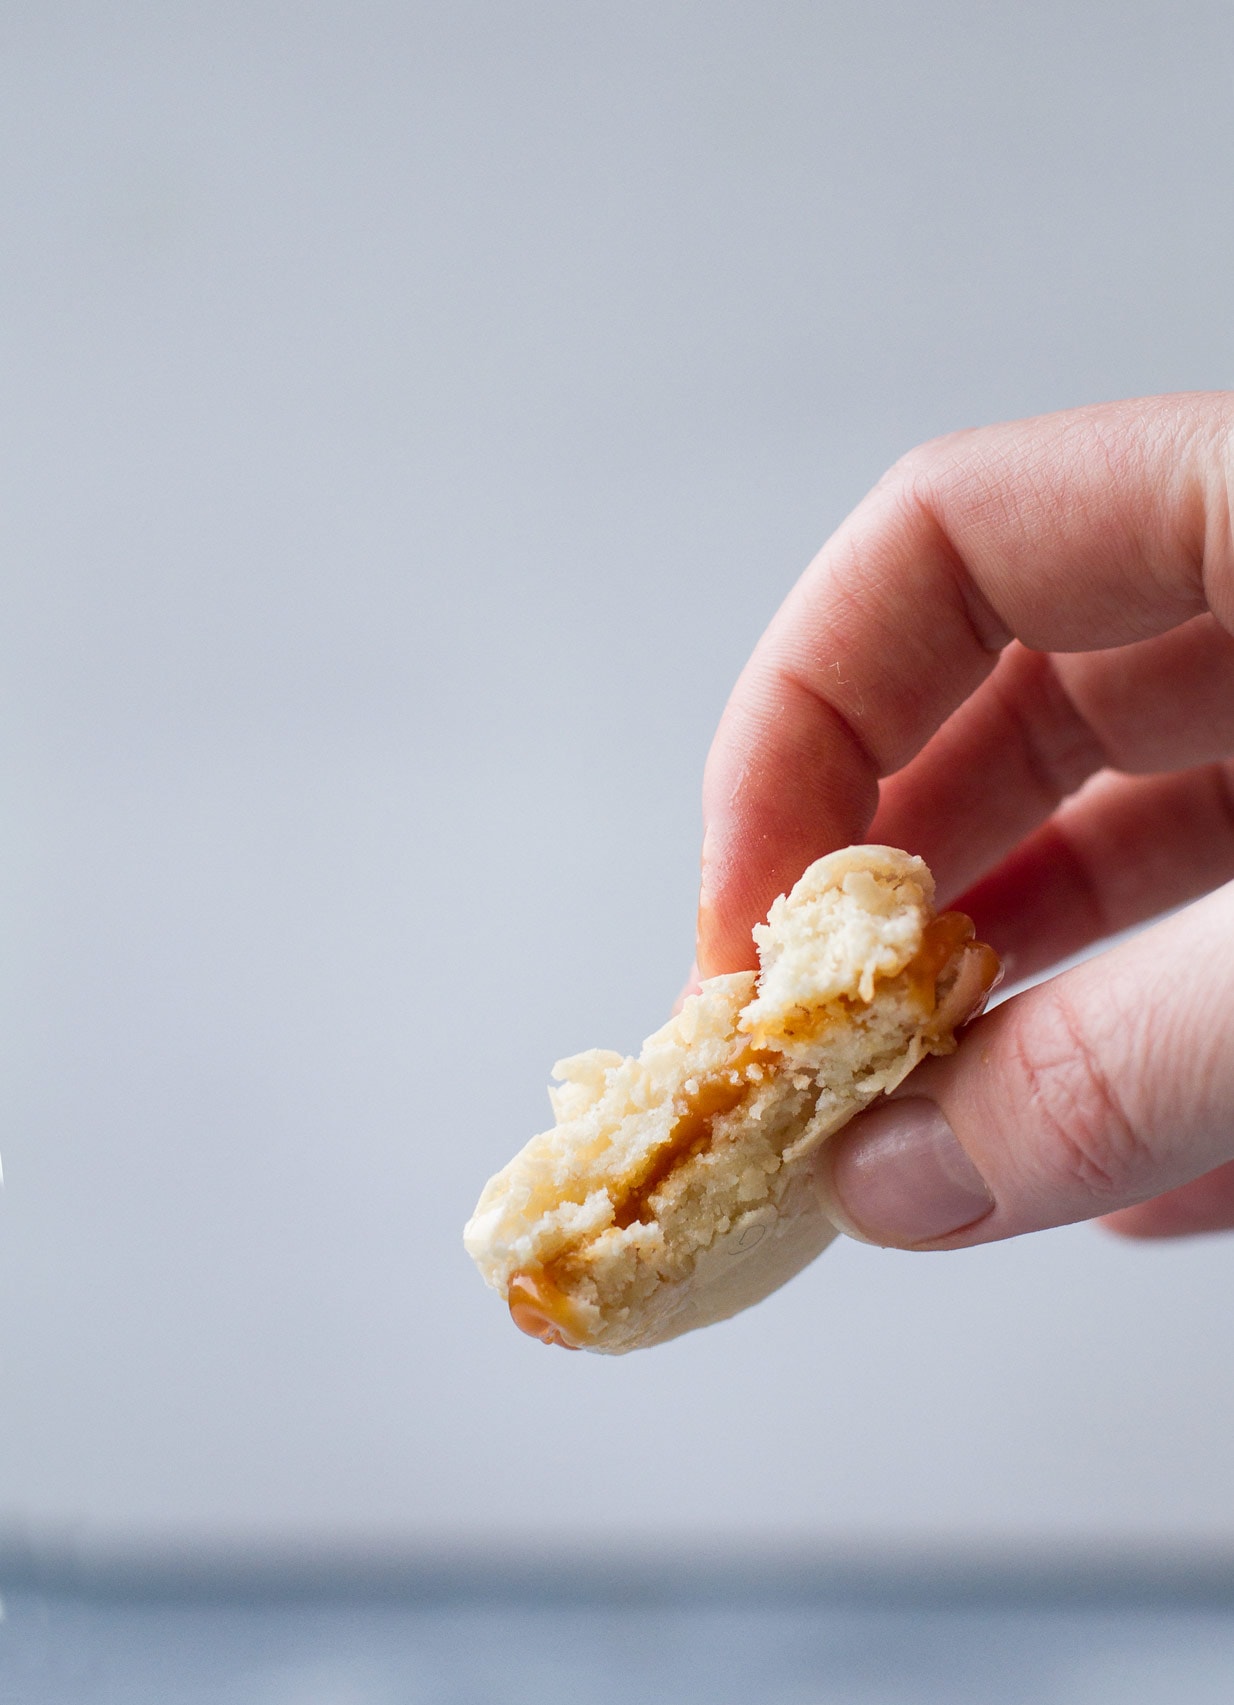 hand holding a salted caramel macaron that is taken a bite out off, off white background.